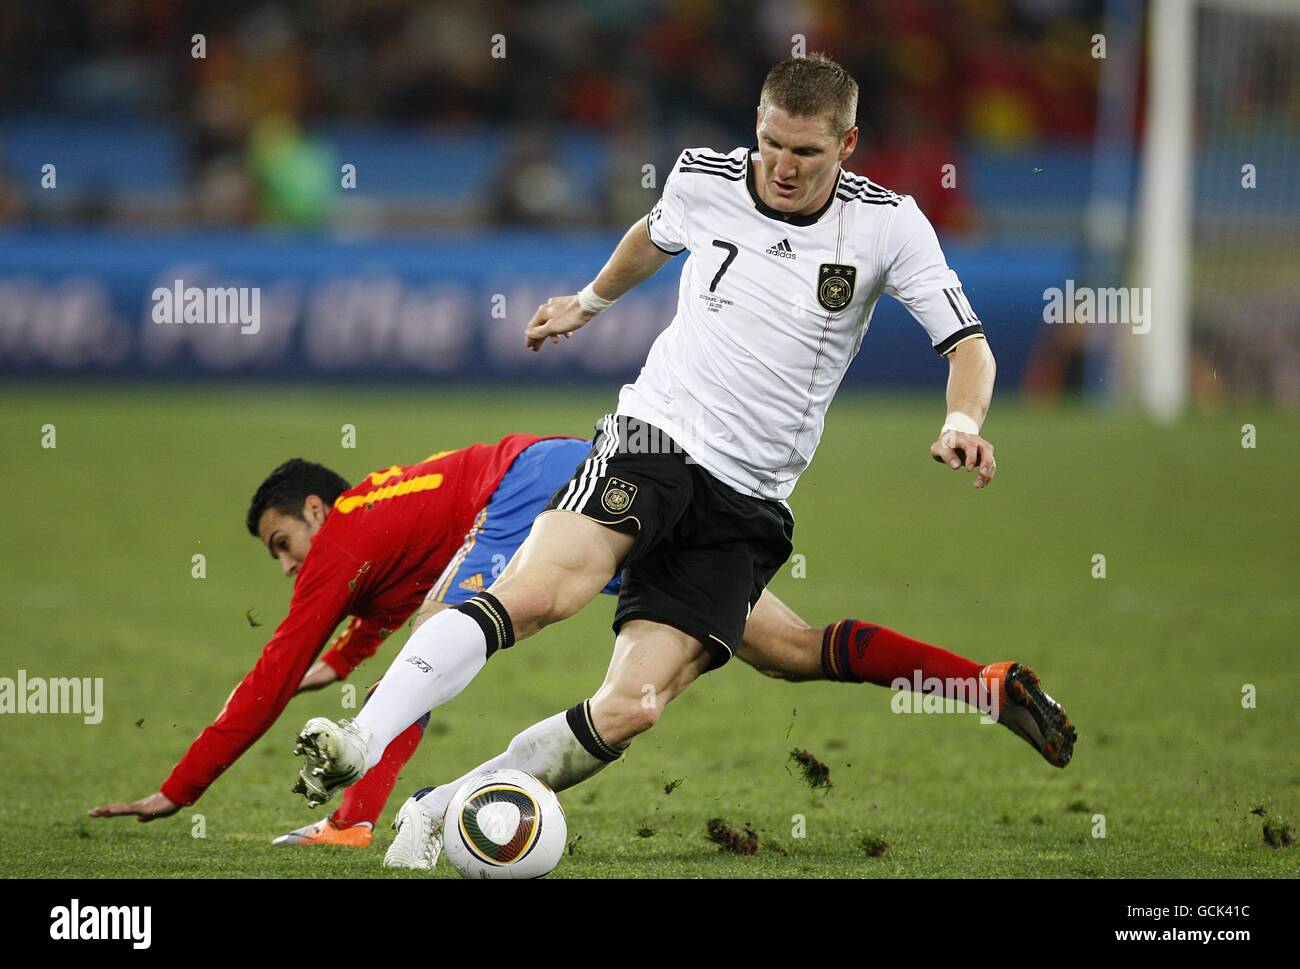 Soccer - 2010 FIFA World Cup South Africa - Semi Final - Germany v Spain - Durban Stadium. Germany's Bastian Schweinsteiger (right) and Spain's Rodriguez Pedro (left) battle for the ball Stock Photo